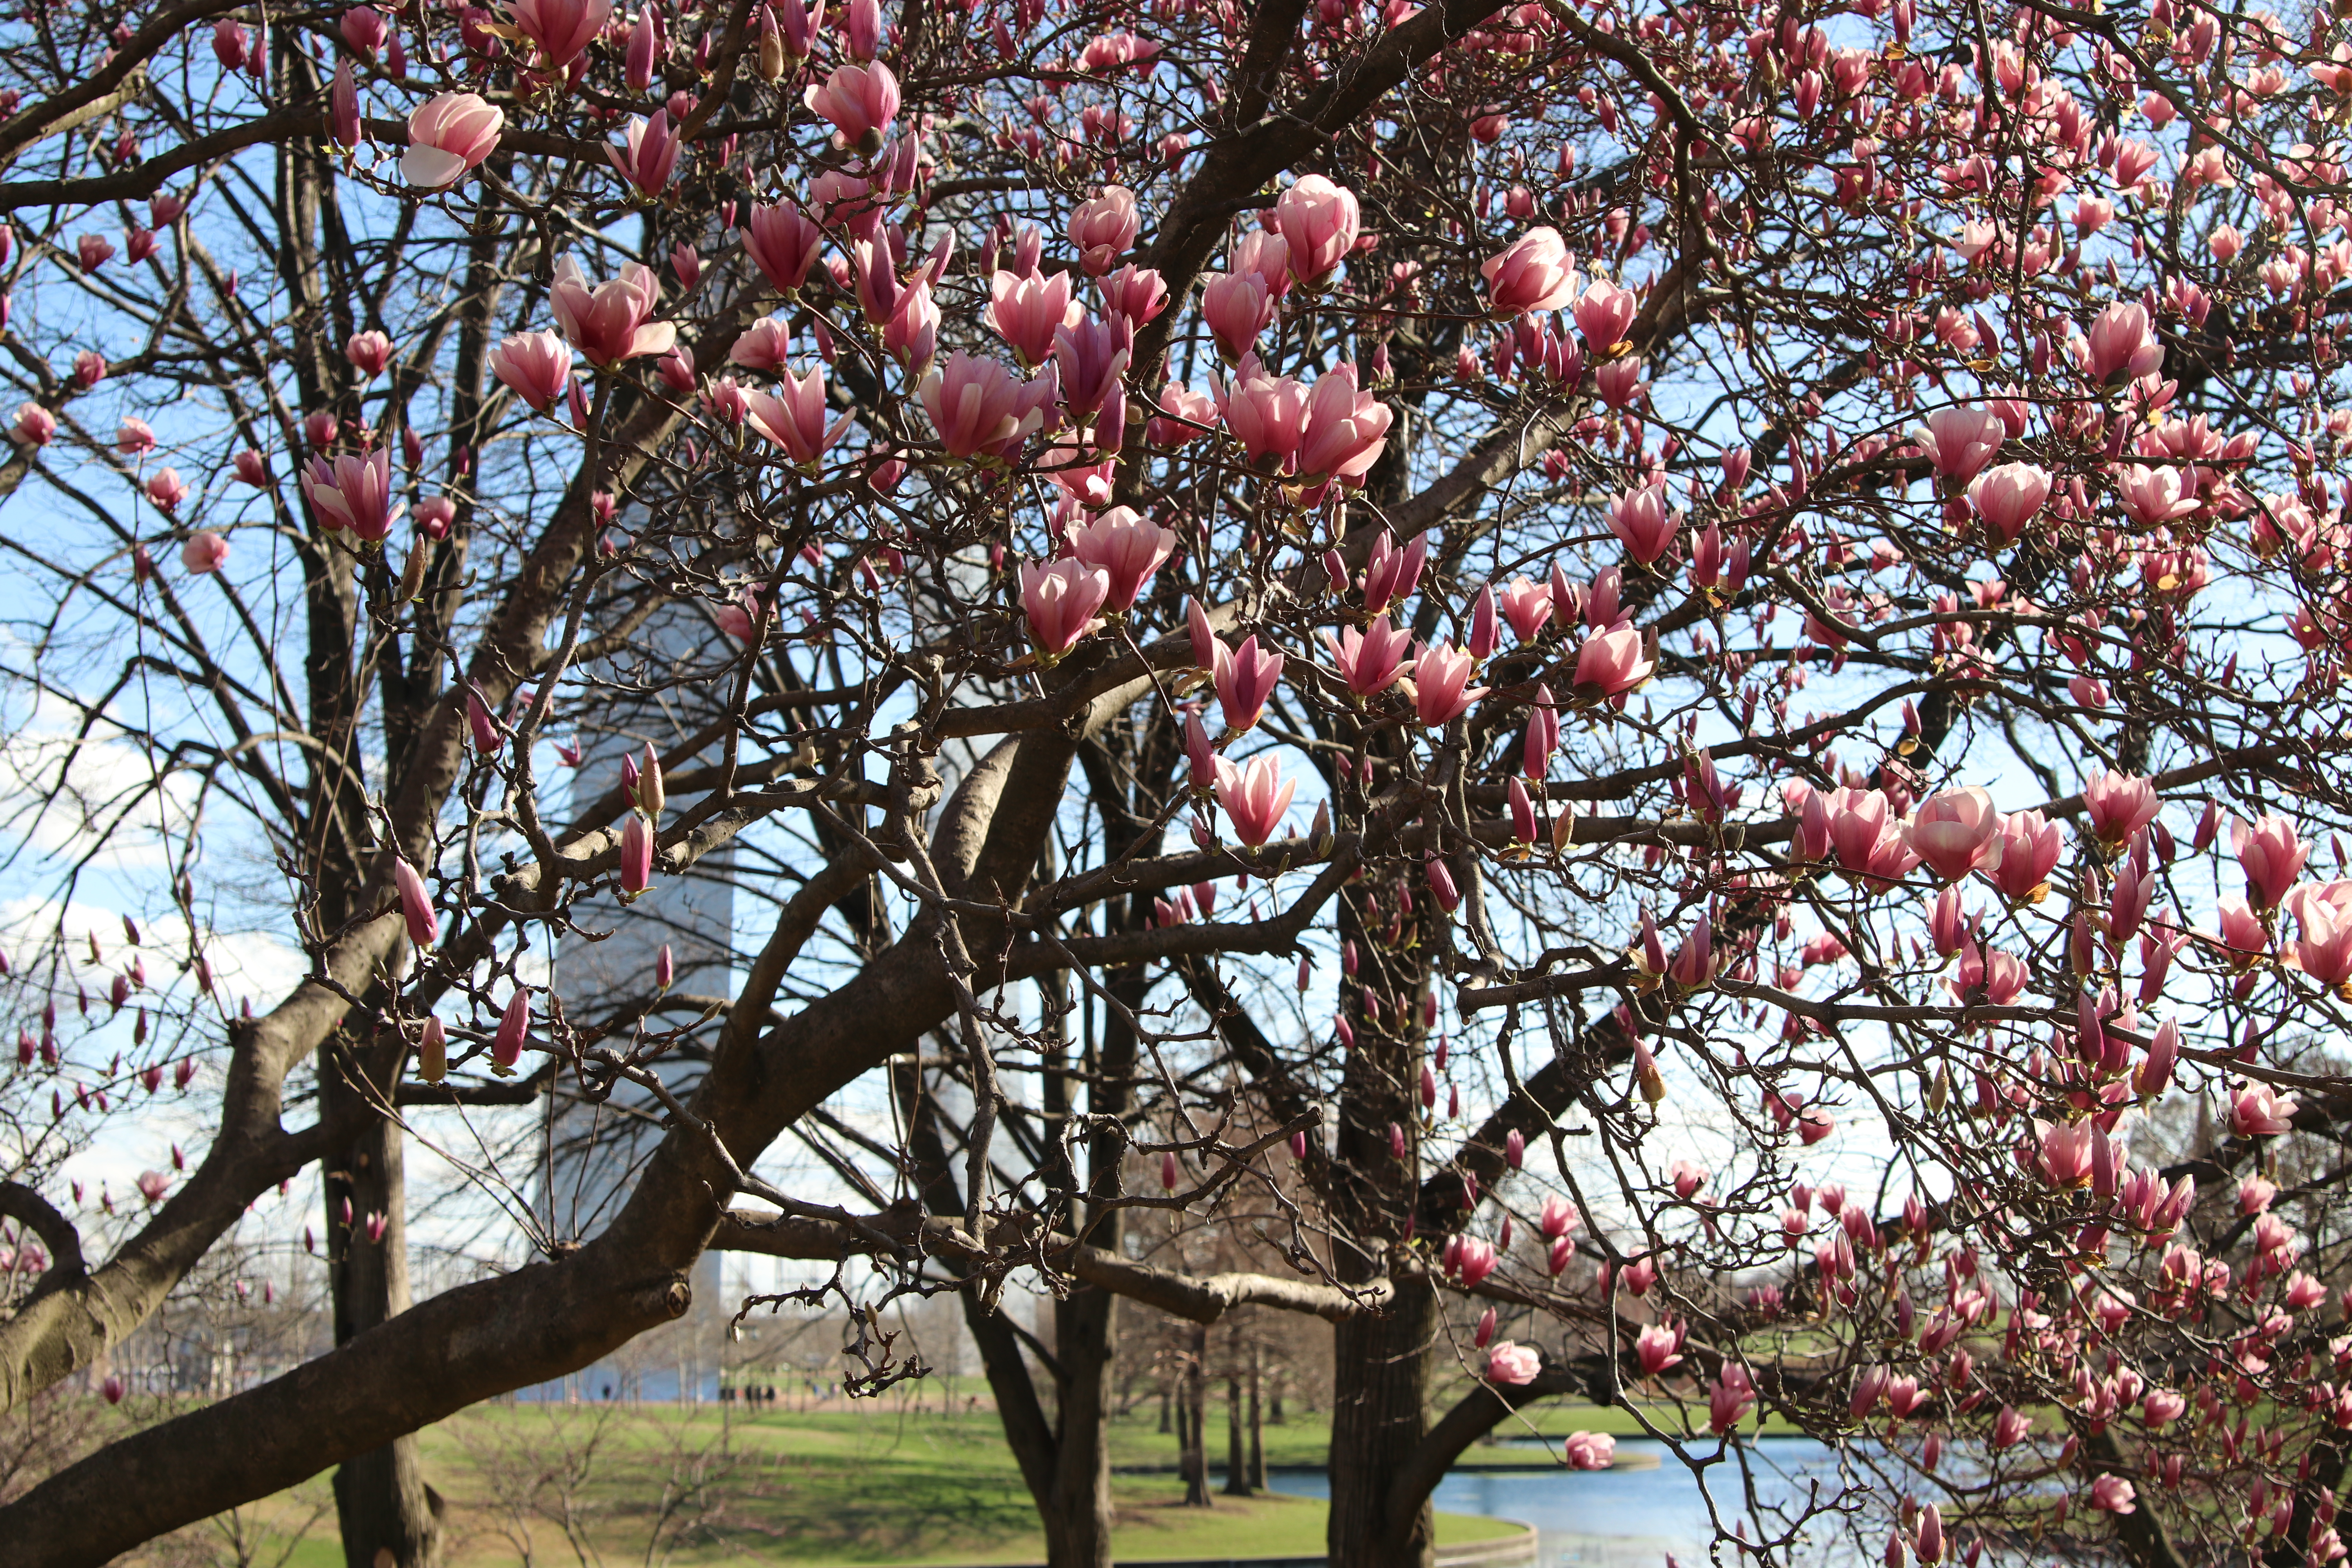 A tree with showy pink flowers and no leaves